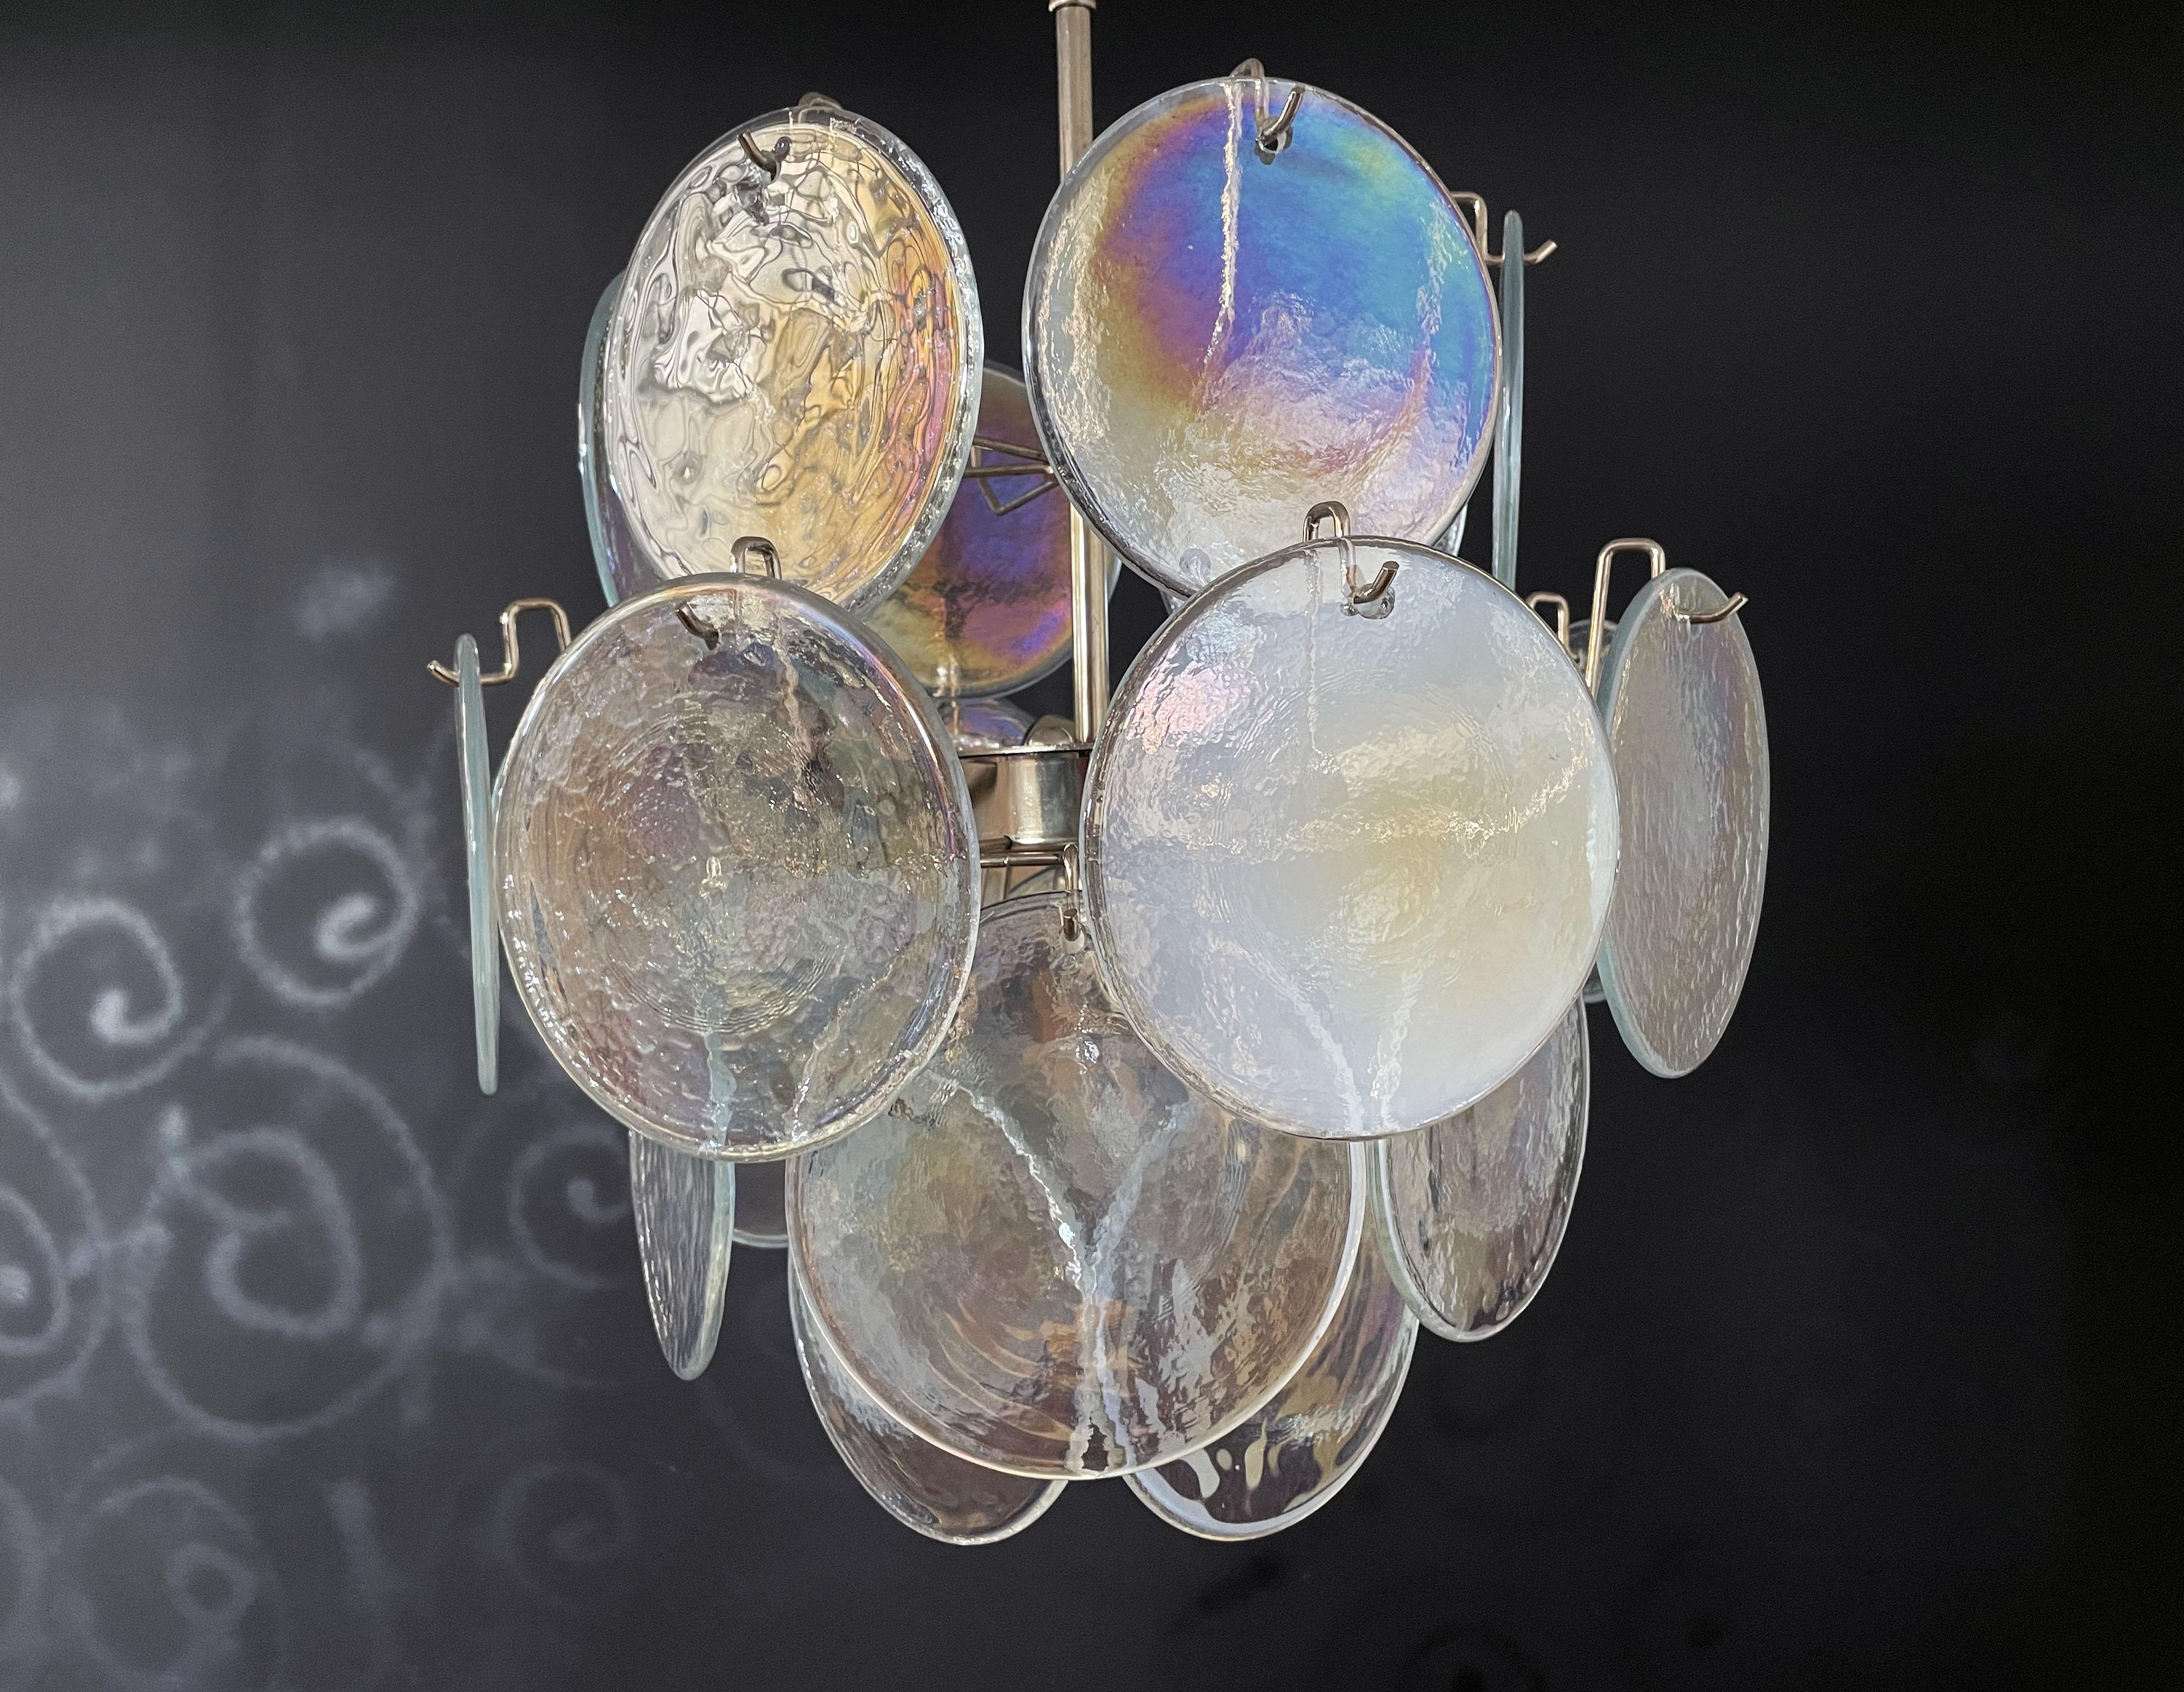 Vintage Italian Murano chandelier in Vistosi style. The chandelier has 24 fantastic iridescent discs in a nickel metal frame. The glasses have the particularity of reflecting a multiplicity of colors, which makes the chandelier a true work of